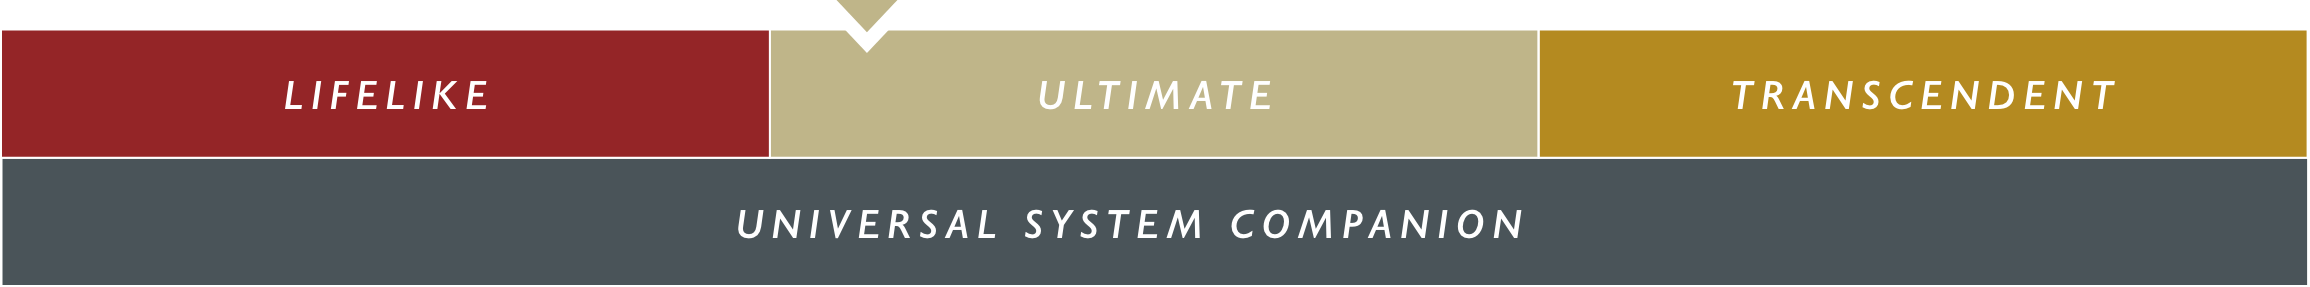 Graphic depicting three levels of a Transparent Audio REFERENCE Phono Interconnect Music System labeled "lifelike," "ultimate," and "transcendent," with an arrow pointing to "ultimate" and a banner below